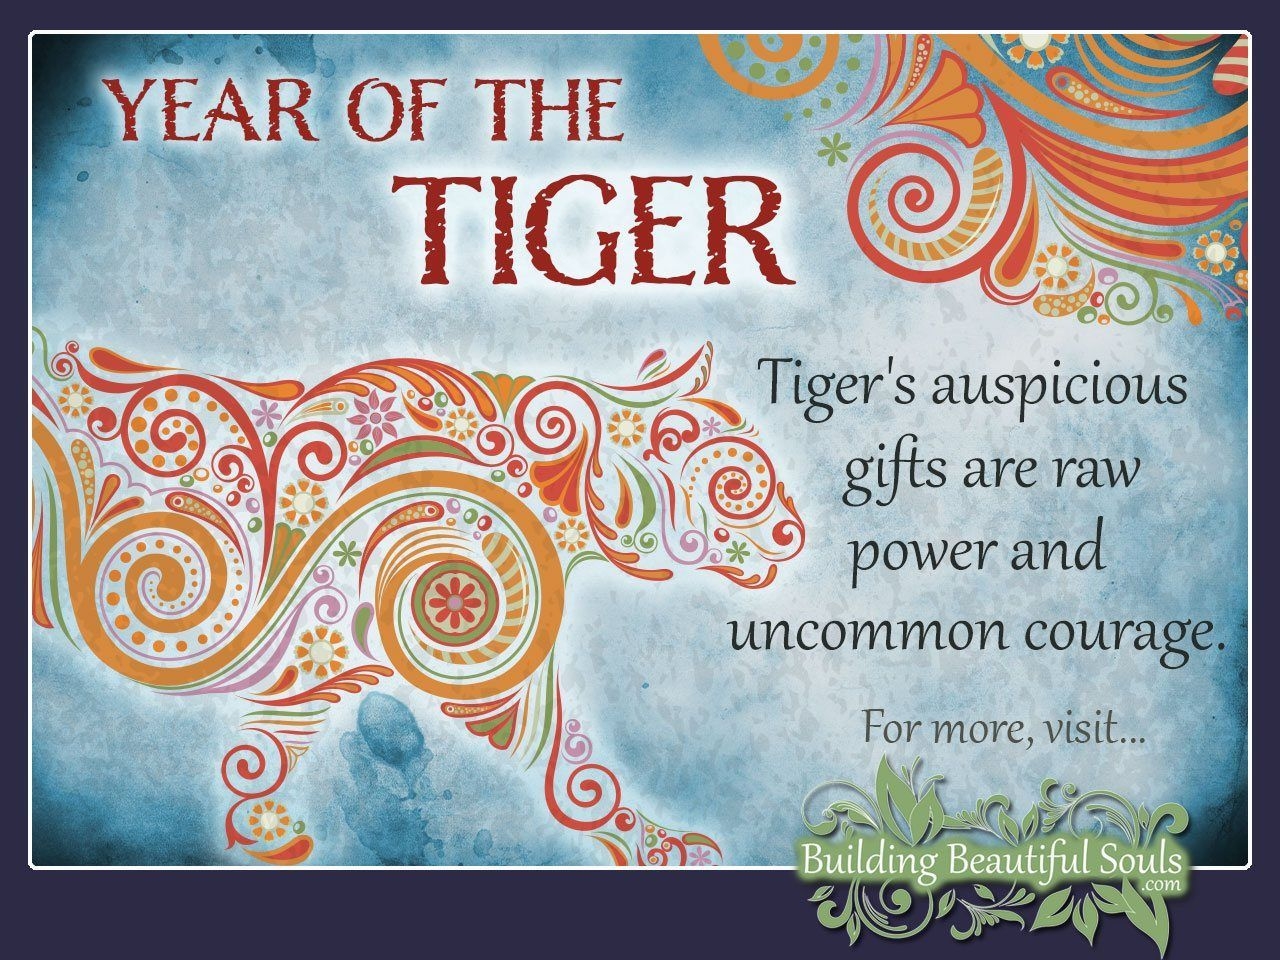 Year Of The Tiger | Chinese Zodiac Tiger | Chinese Zodiac